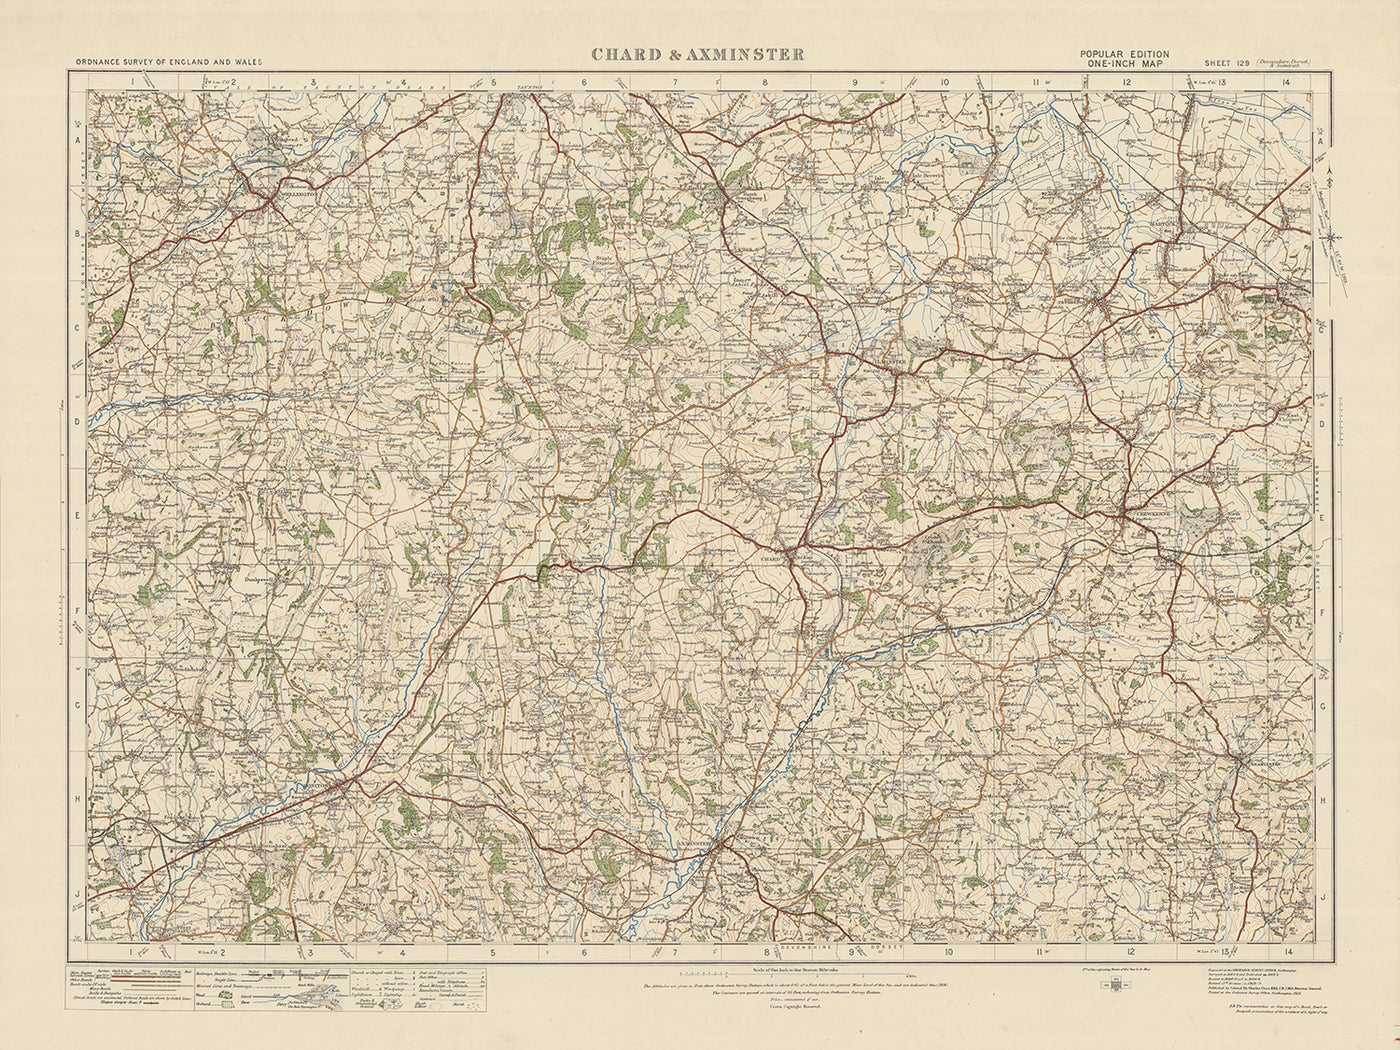 Carte Old Ordnance Survey, feuille 129 - Chard & Axminster, 1925 : Honiton, Crewkerne, Ilminster, Wellington, Blackdown Hills AONB